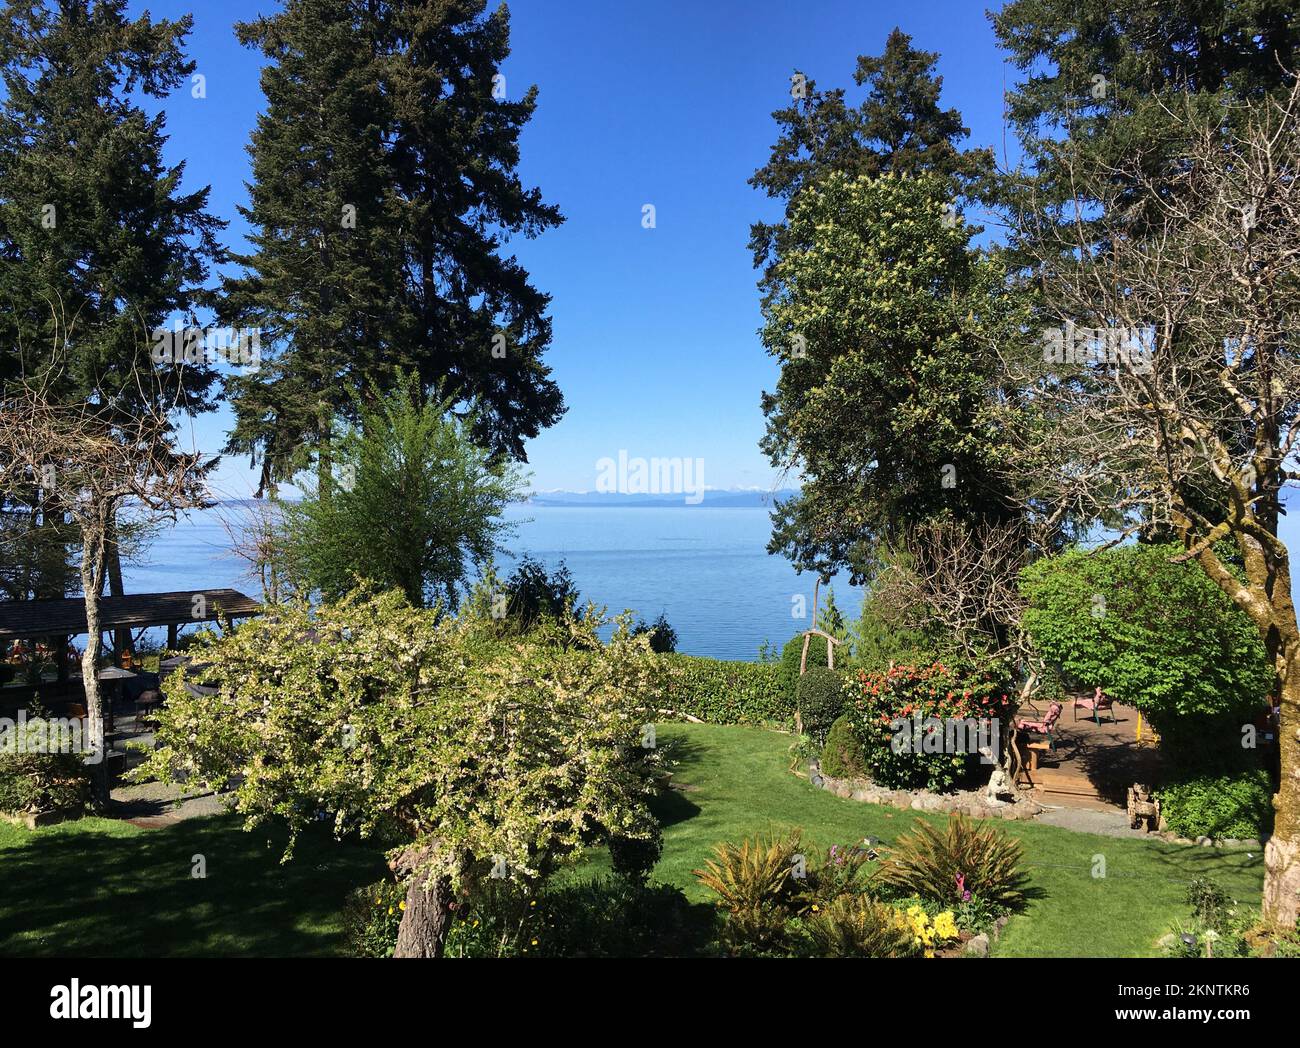 Beautiful view of the pacific ocean on the East Coast of Vancouver Island in Qualicum Bay, British Columbia, Canada Stock Photo